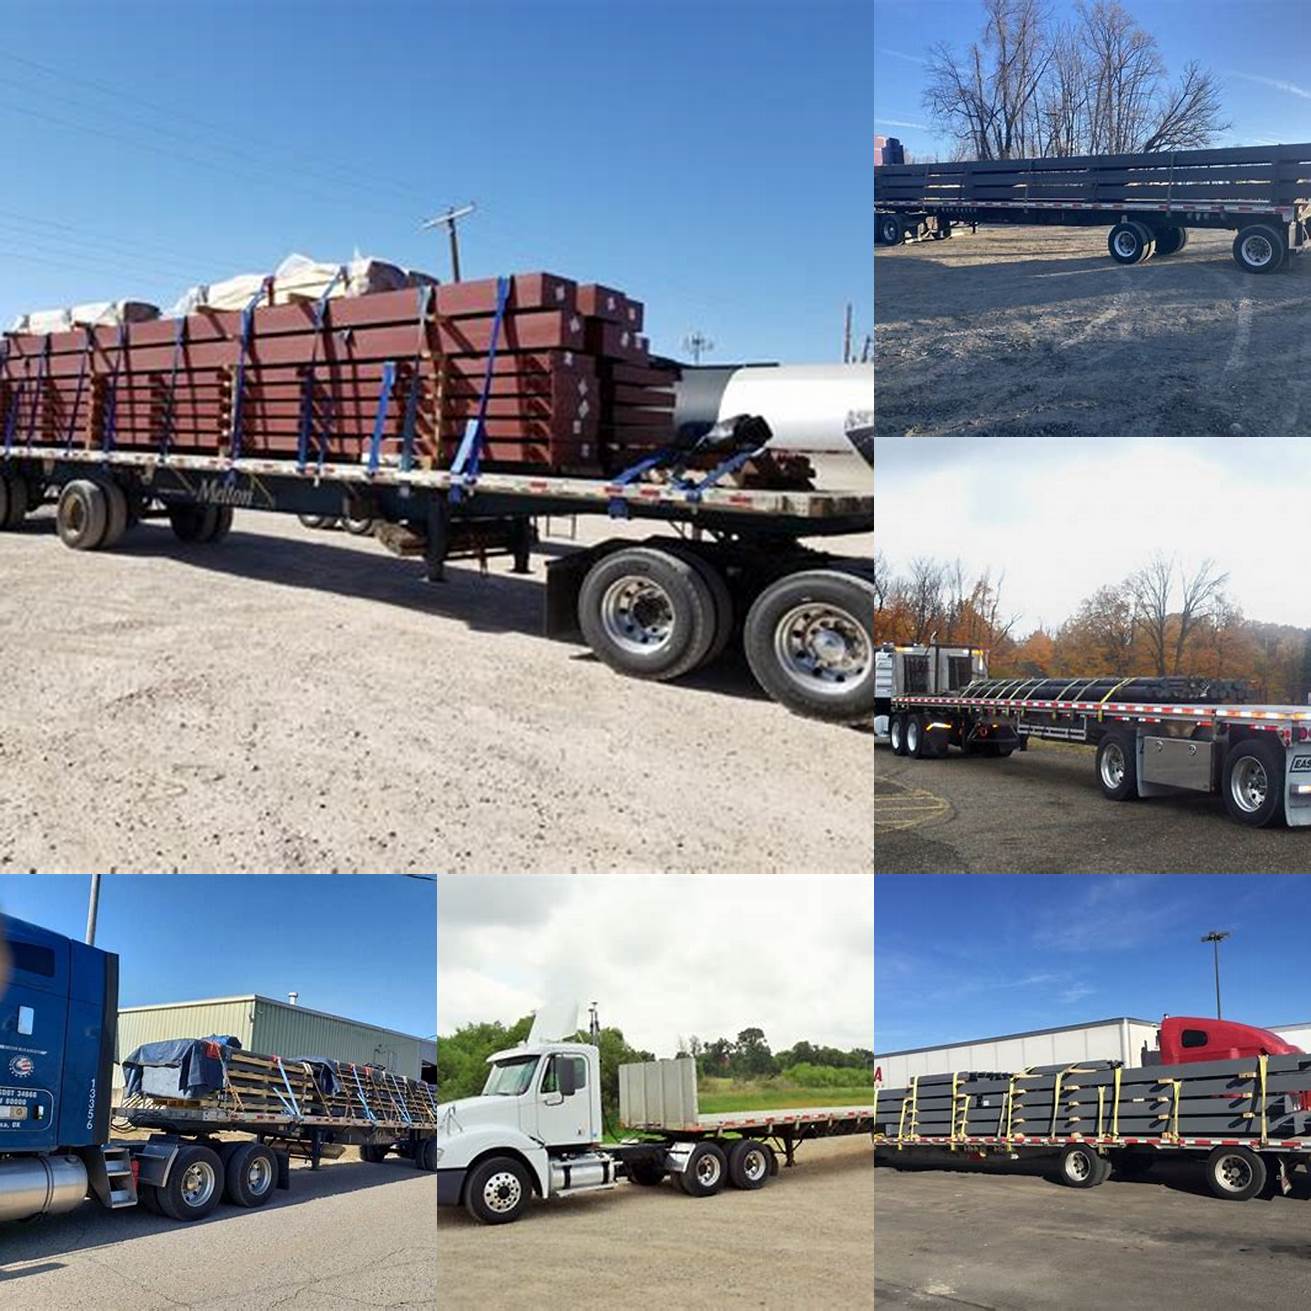 Flat bed truck carrying steel beams